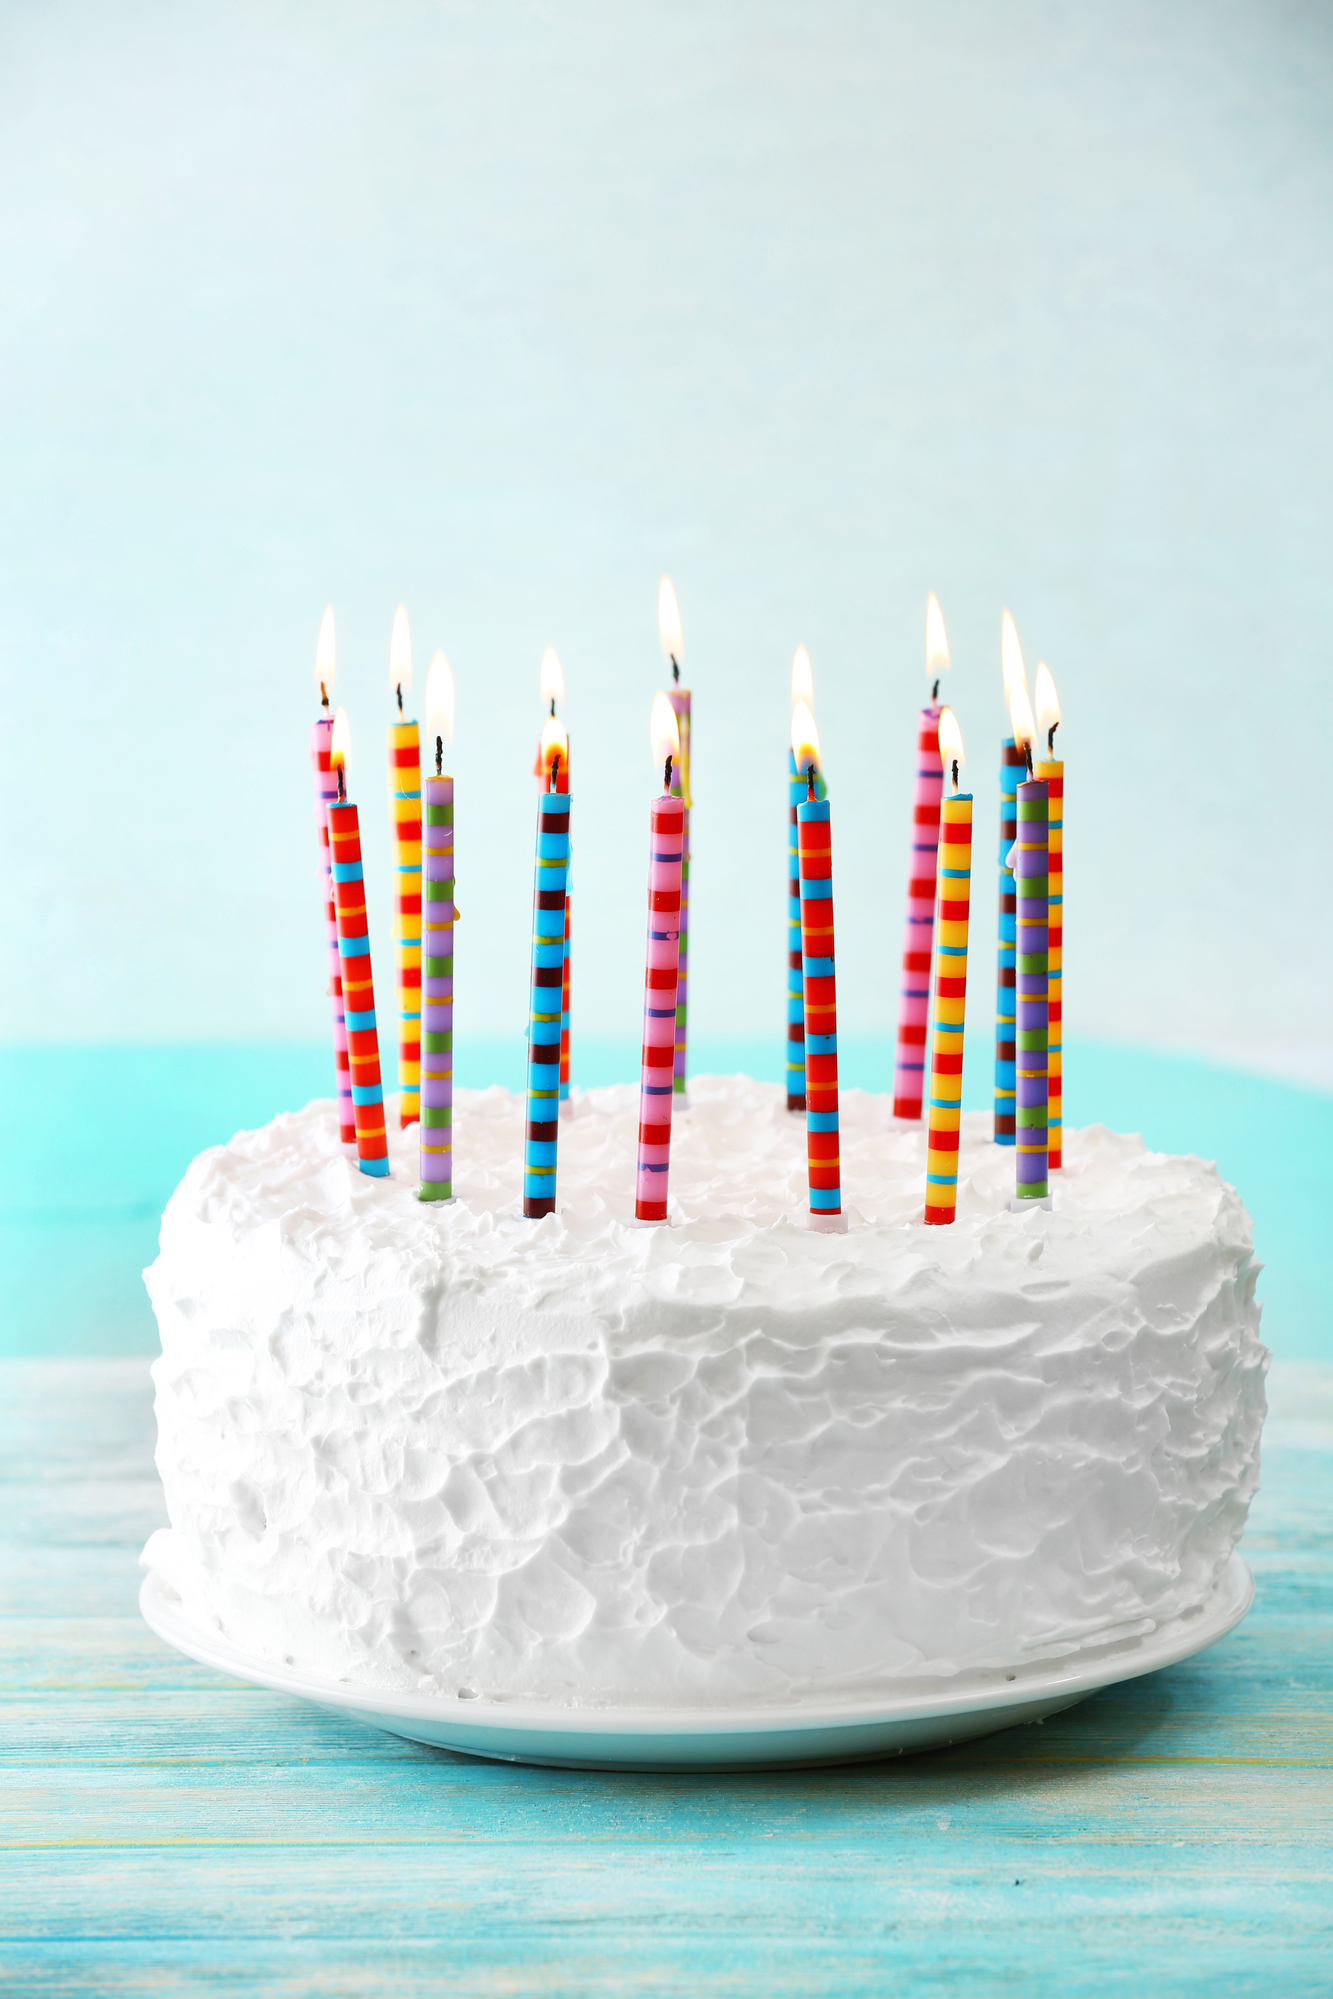 White frosted cakes with candles on a blue background.